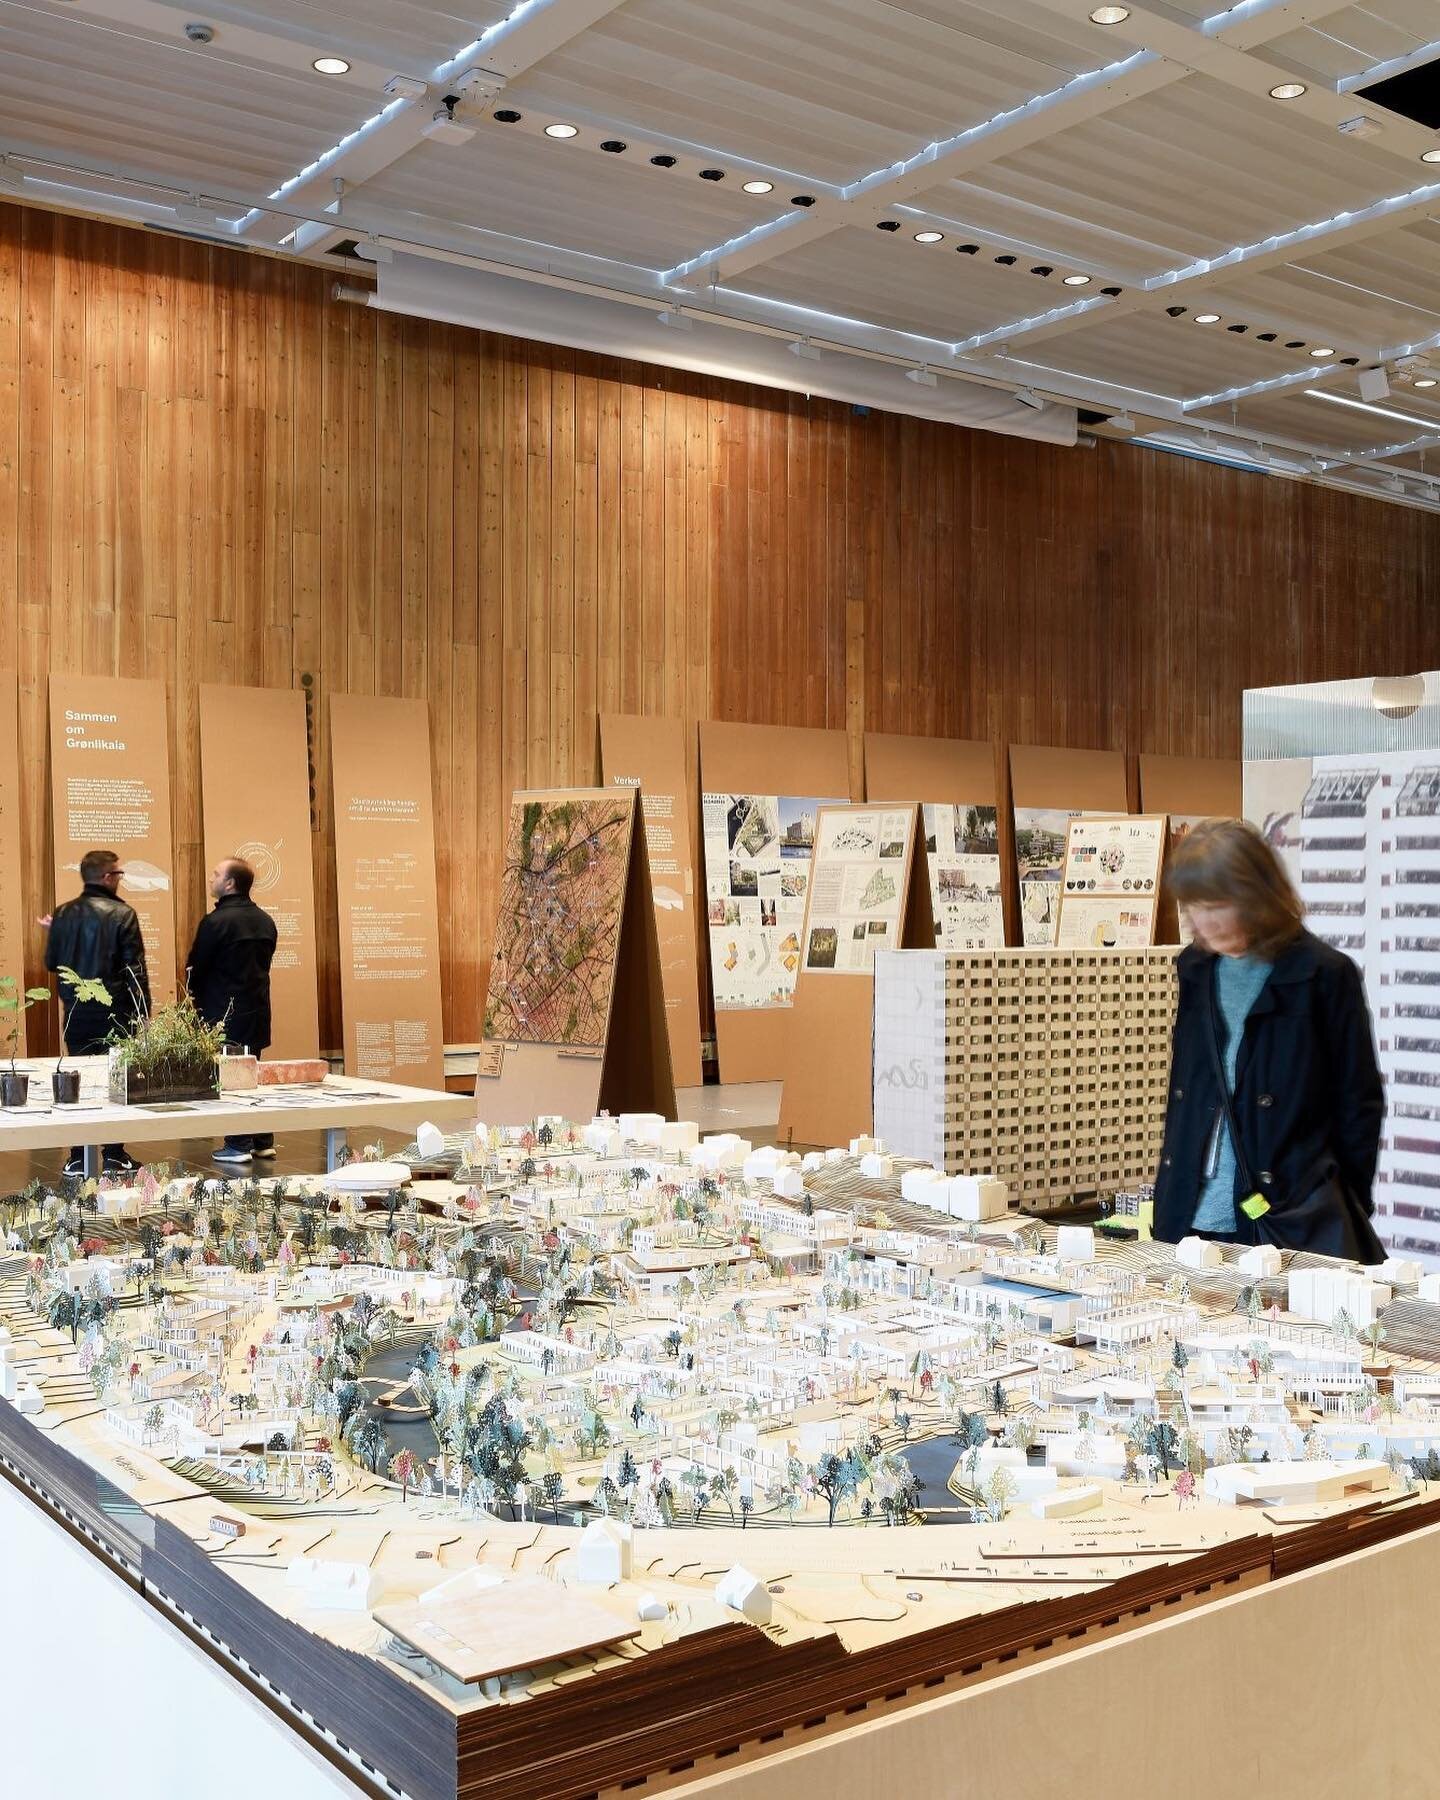 To be continued 

The 8th Oslo Architecture Triennale, Mission Neighbourhood &ndash; (Re)forming Communities, is over for this time. During six intense weeks more than 20.000 people visited the 2022 Triennale events and exhibitions at the Oslo Neighb